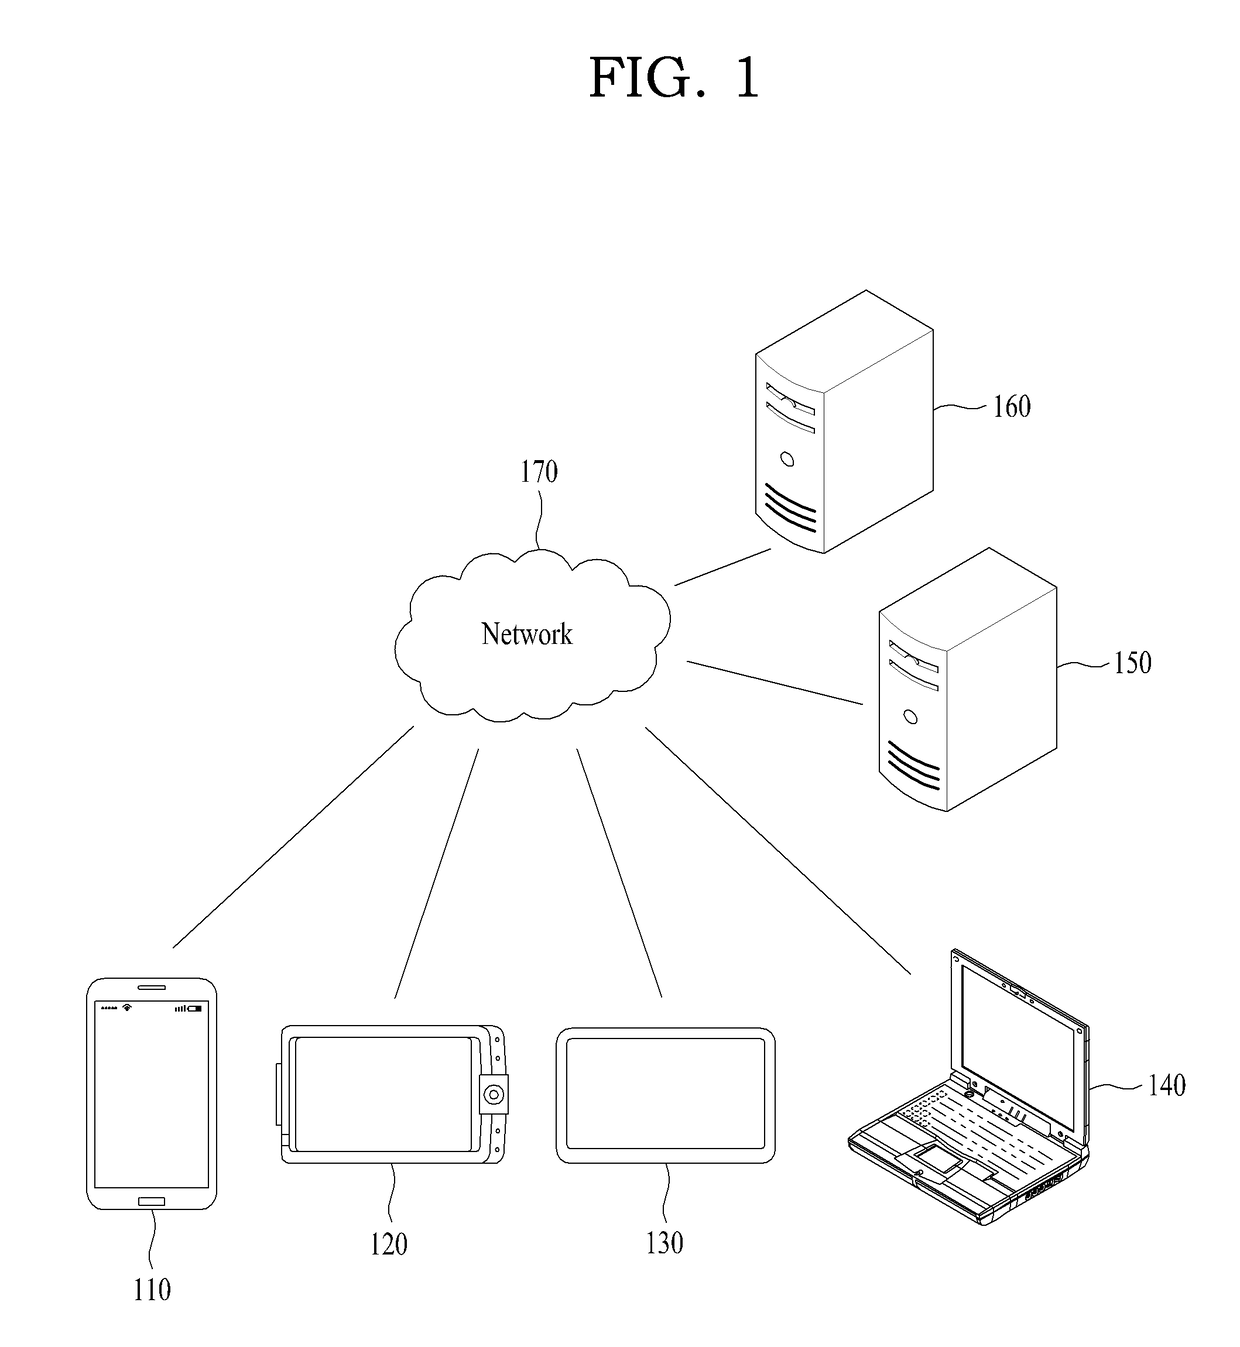 Methods, apparatuses, systems, and non-transitory computer readable media for image trend detection and curation of image